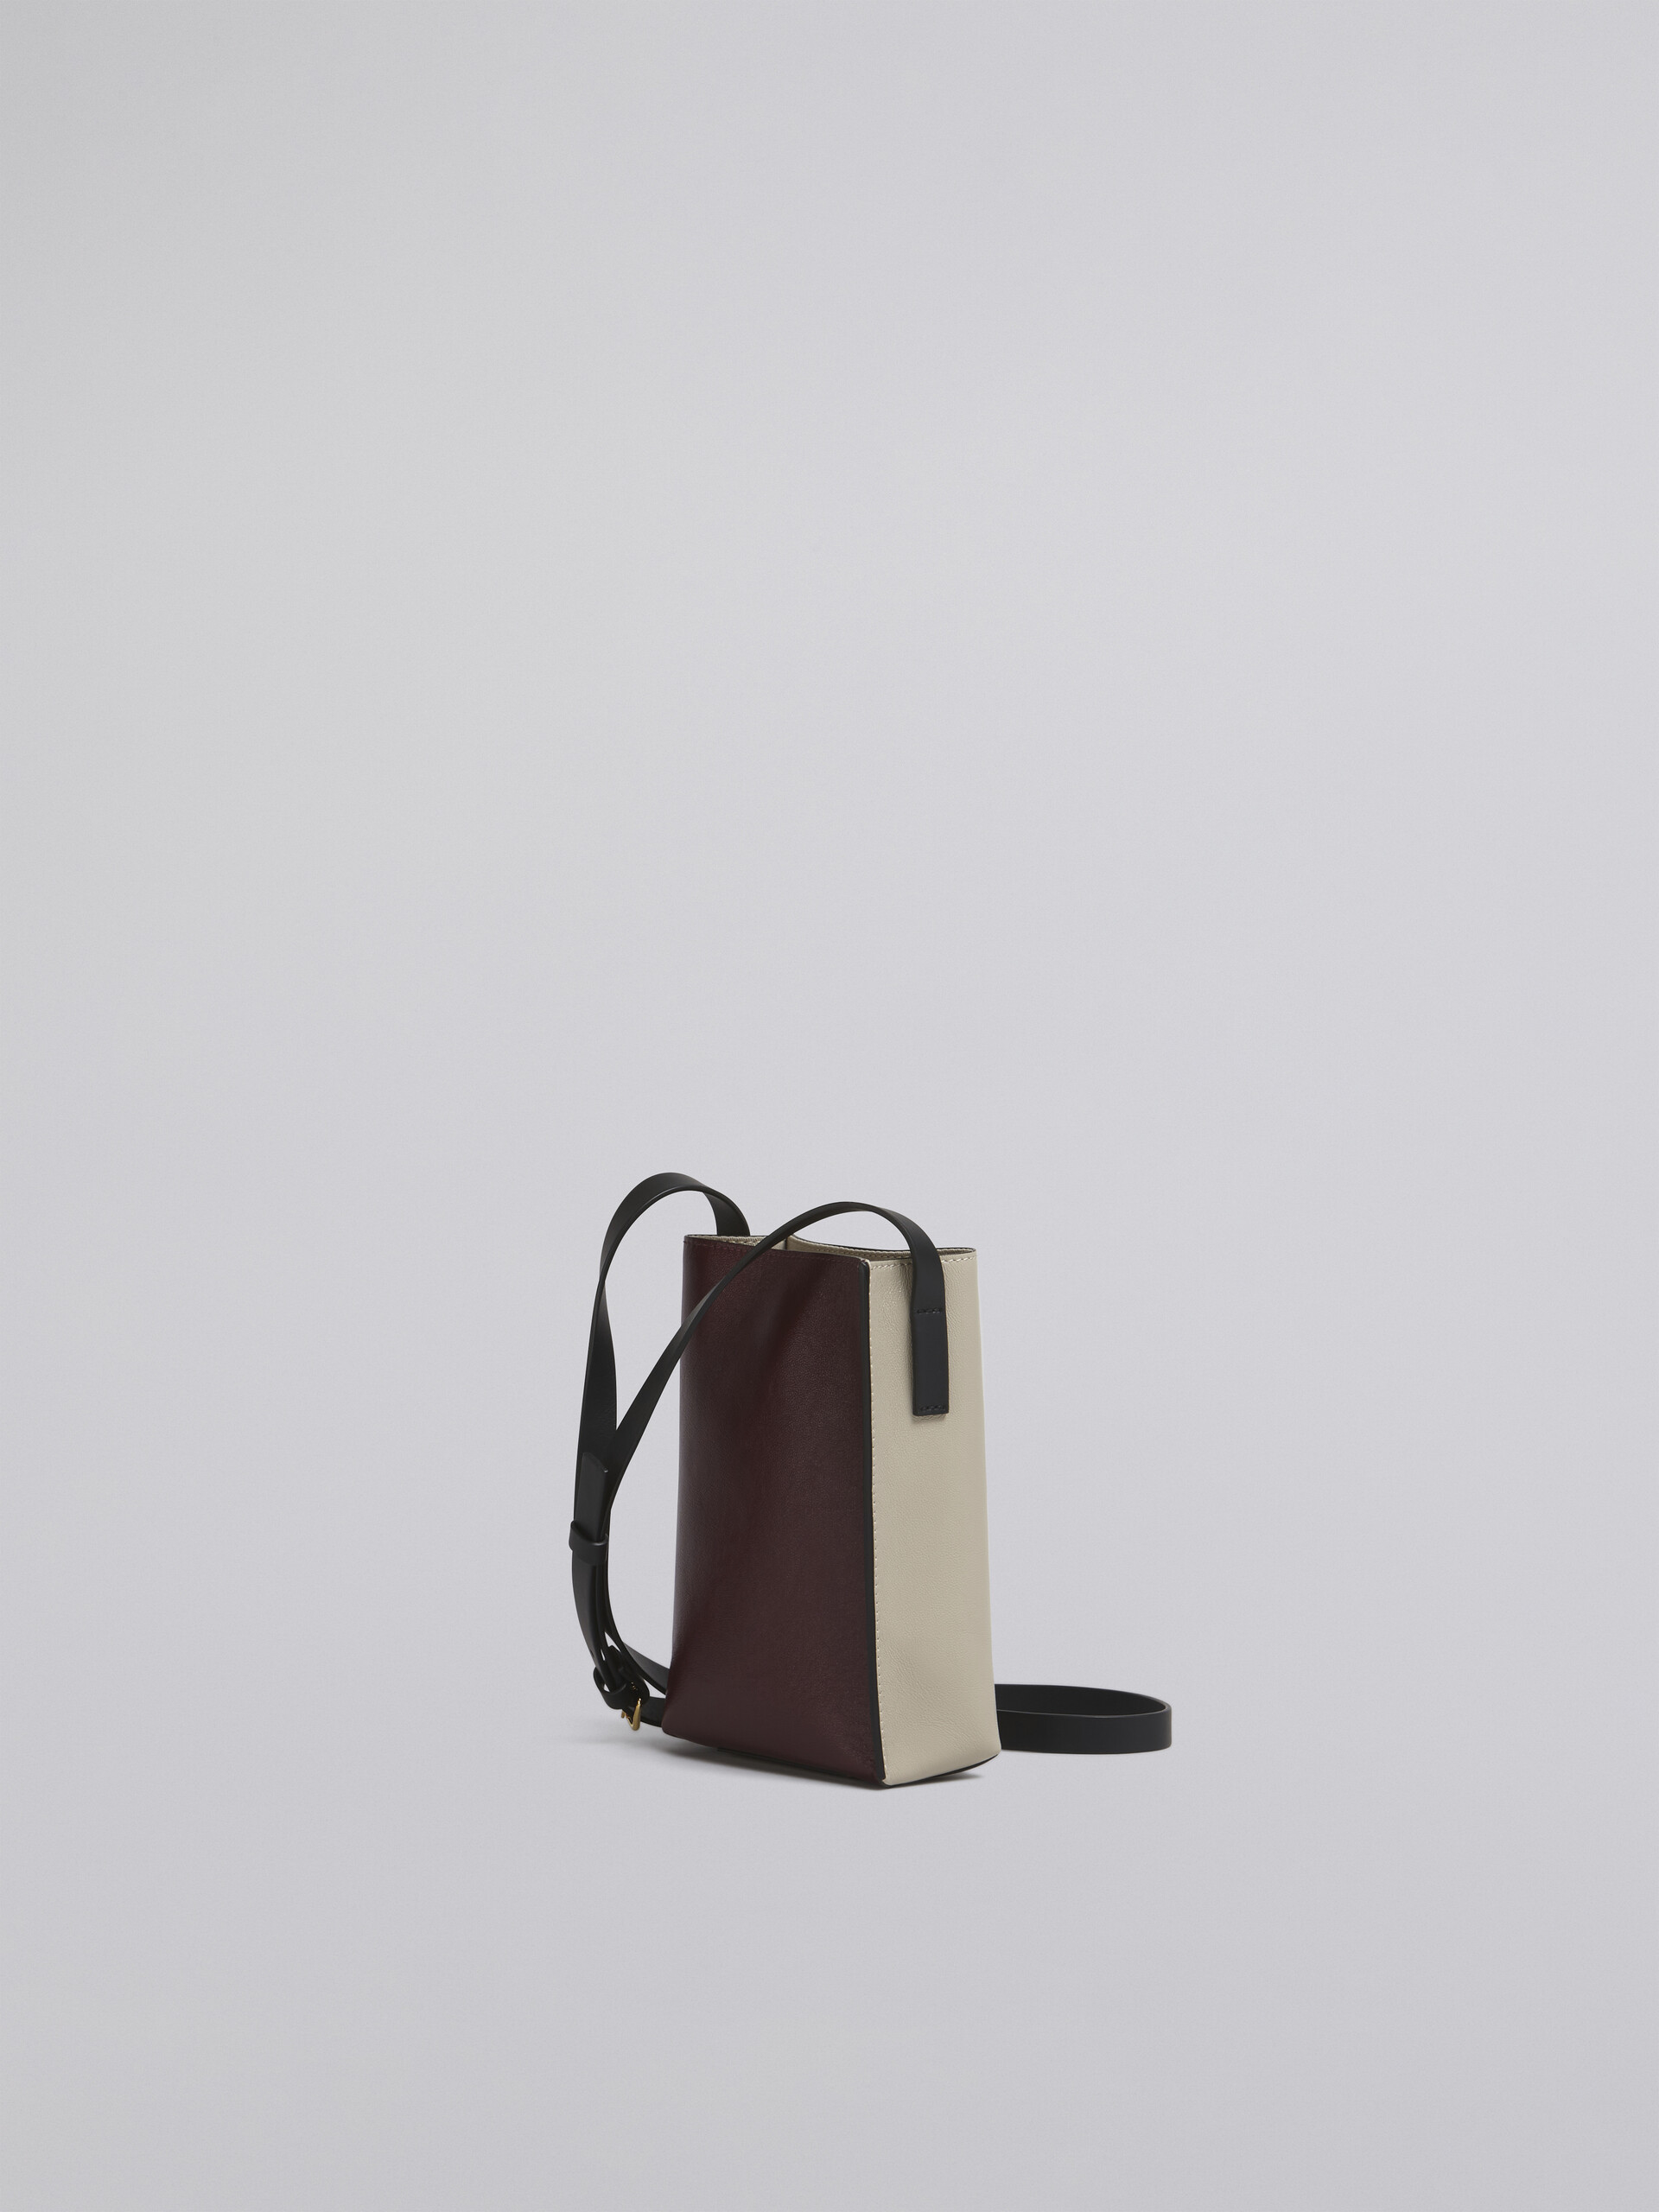 MUSEO SOFT nano bag in beige and burgundy leather - Shoulder Bags - Image 2